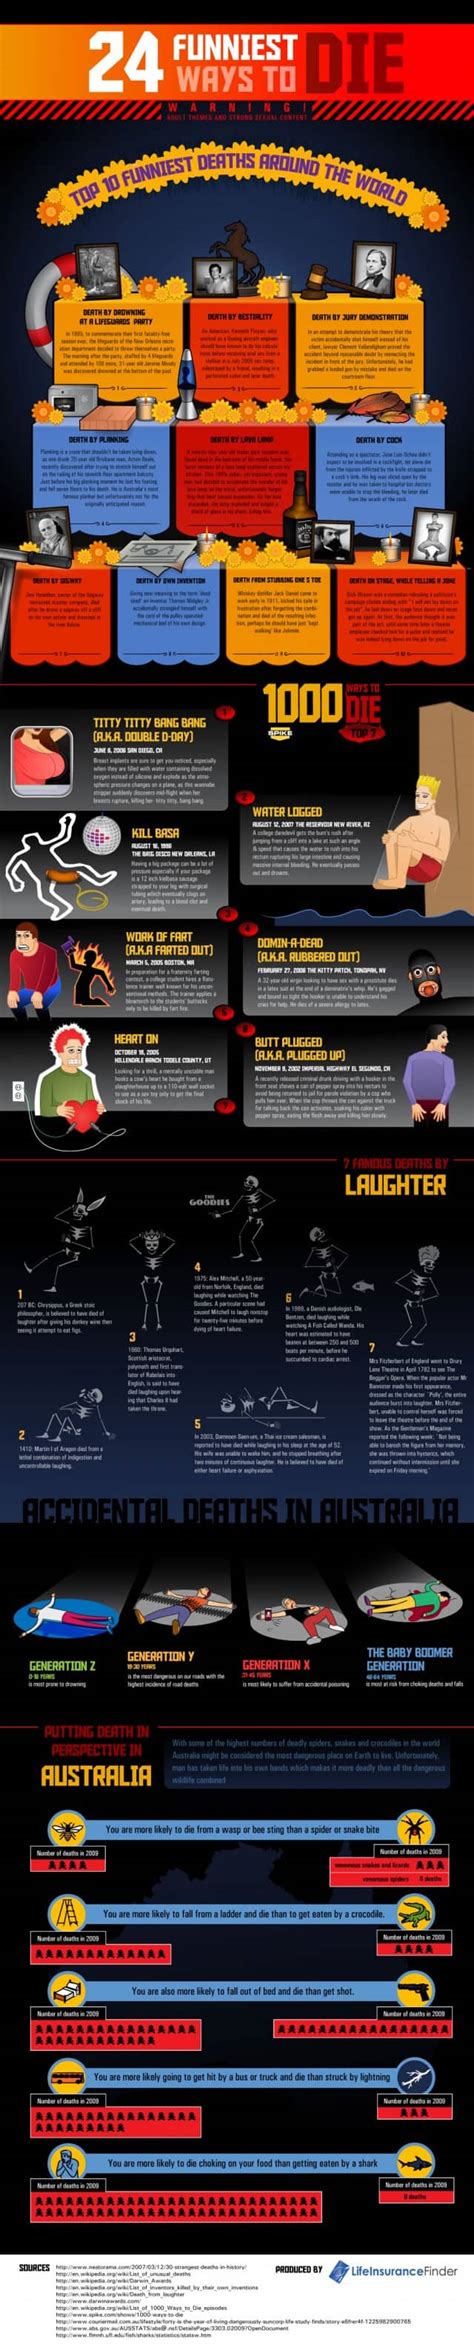 Funniest Deaths Daily Infographic